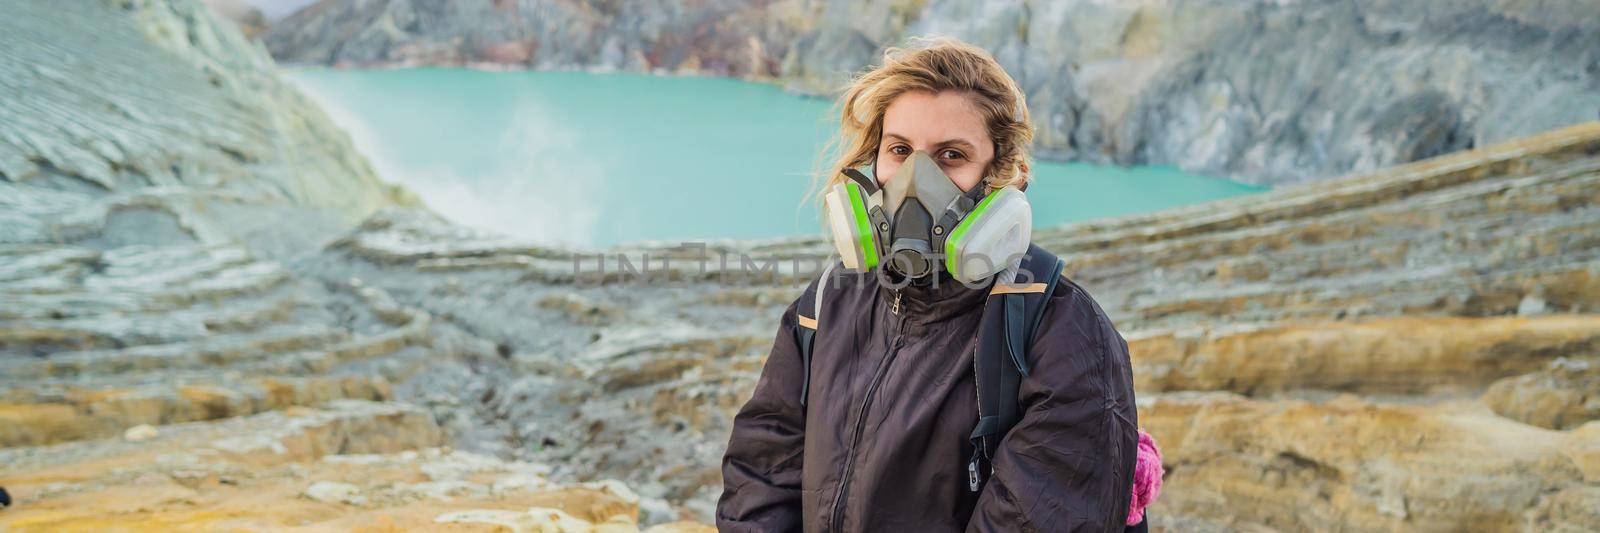 BANNER, LONG FORMAT Young woman tourist sitting at the edge of the crater of the Ijen volcano or Kawah Ijen on the Indonesian language. Famous volcano containing the biggest in the world acid lake and sulfur mining spot at the place where volcanic gasses come from the volcano. She wears a respirator to protect from dangerous volcanic gasses by galitskaya